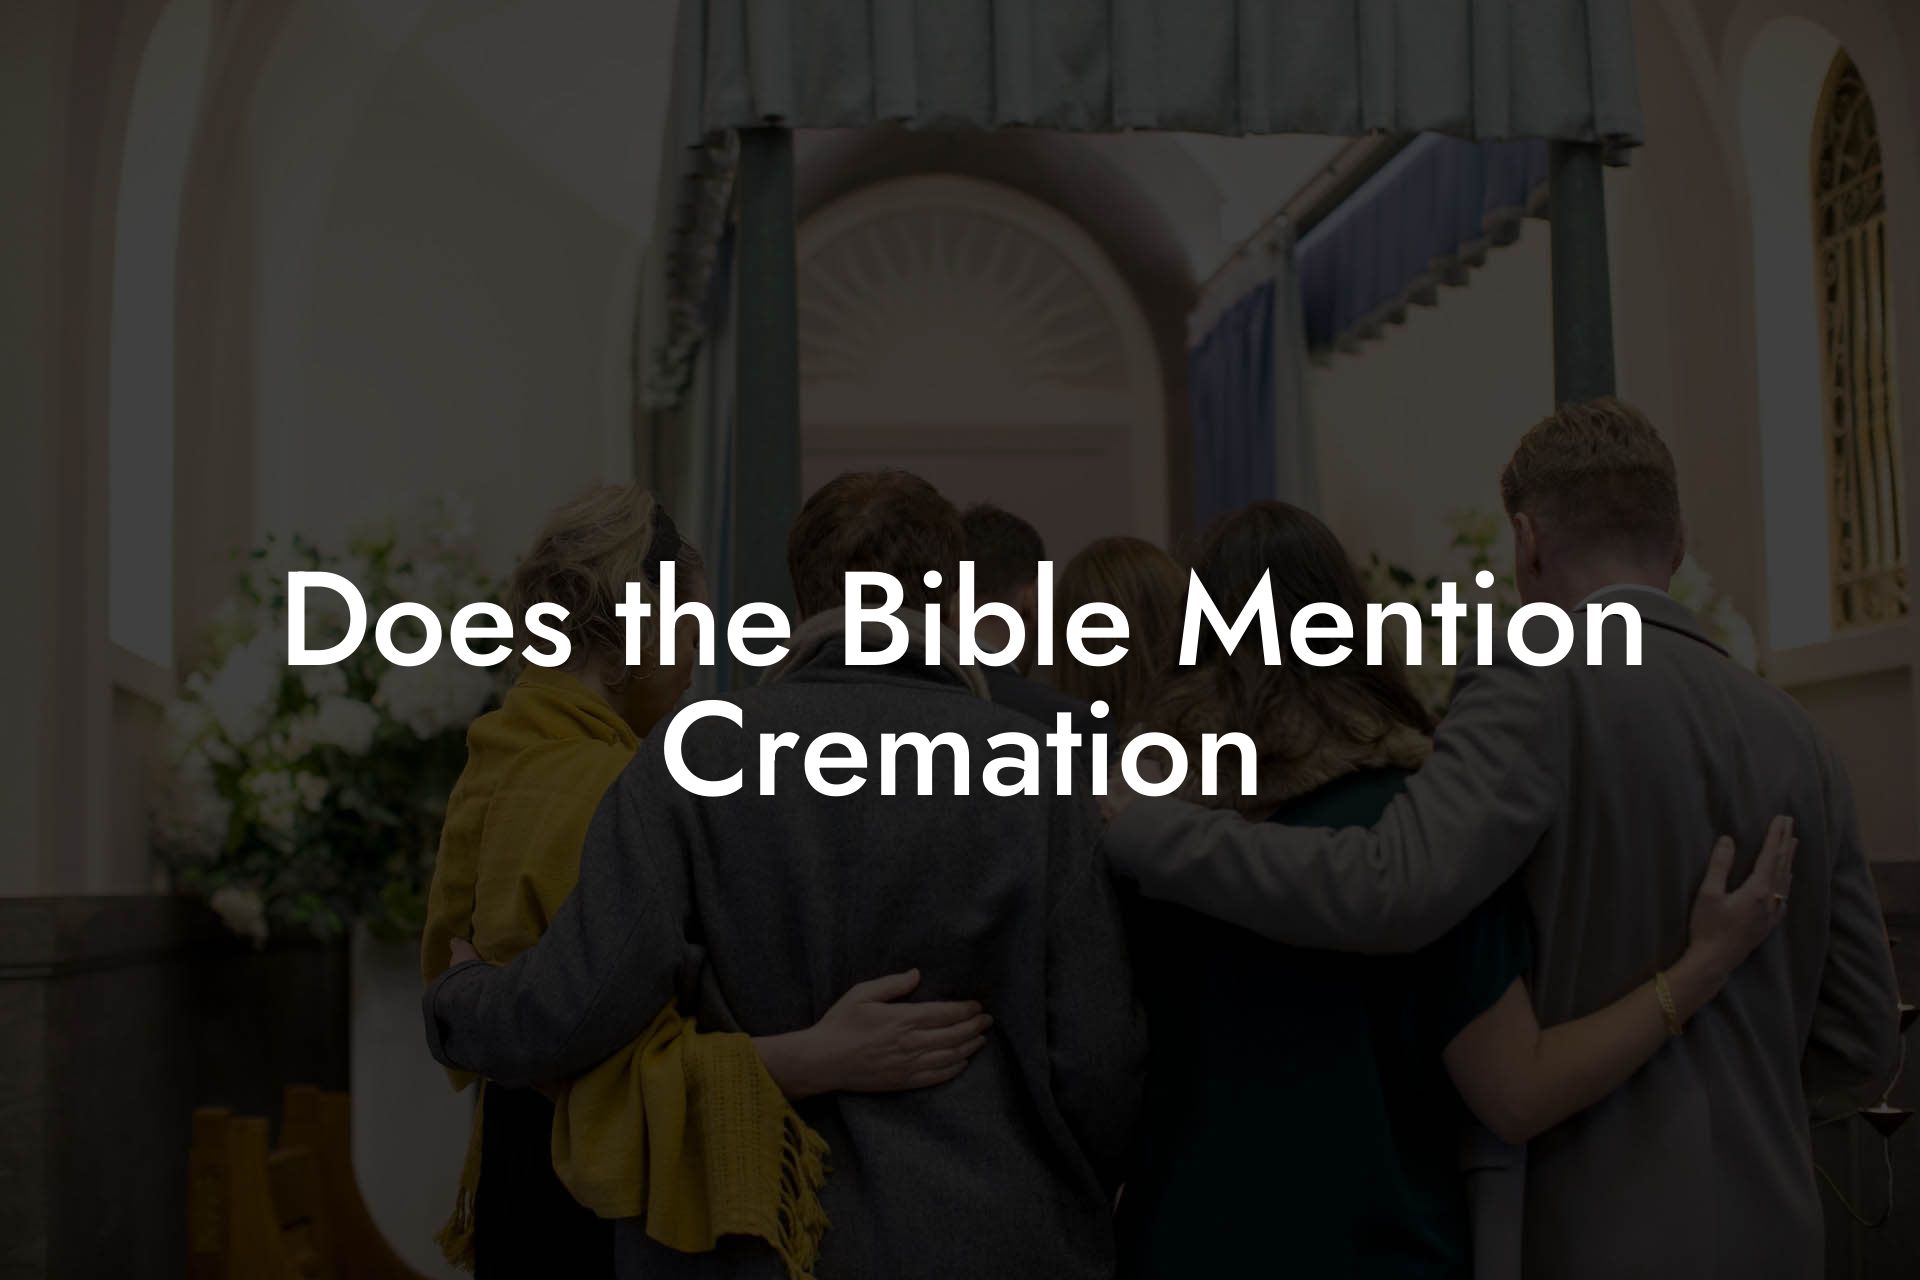 Does the Bible Mention Cremation